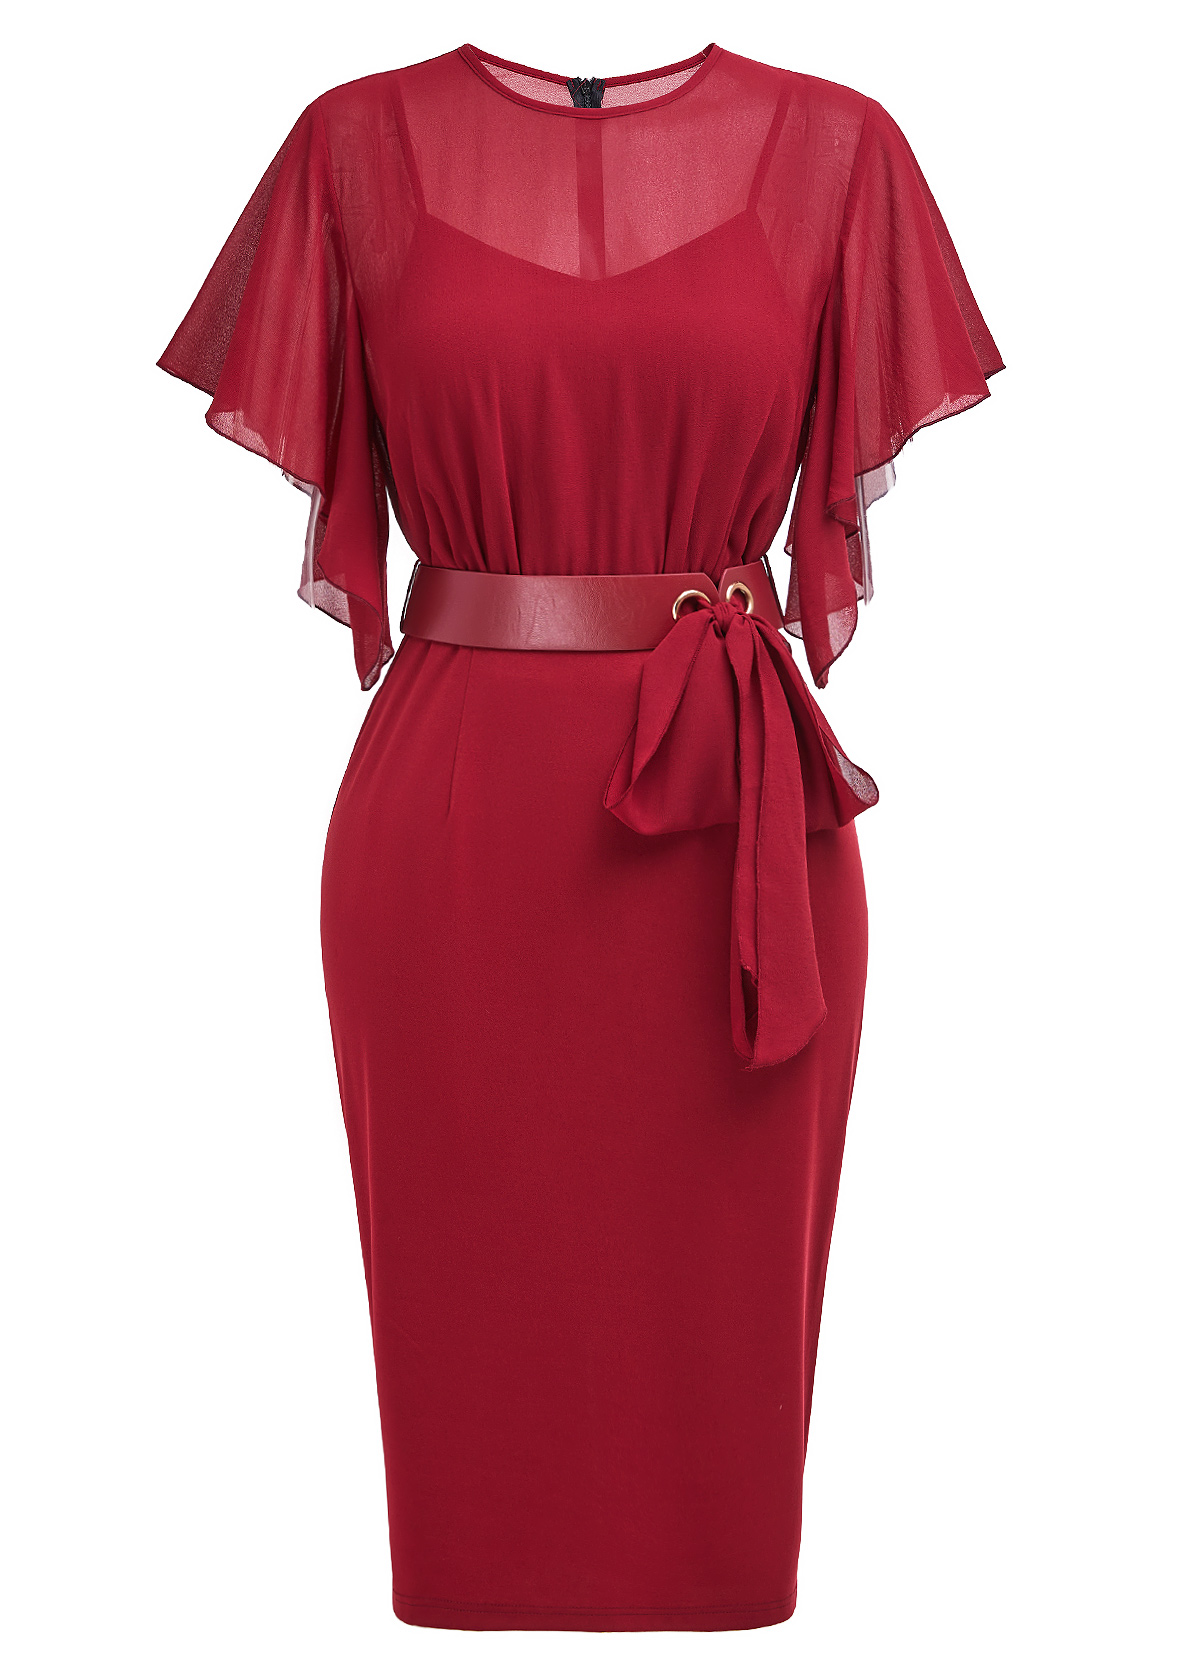 Tie Belted Wine Red Short Sleeve Bodycon Dress